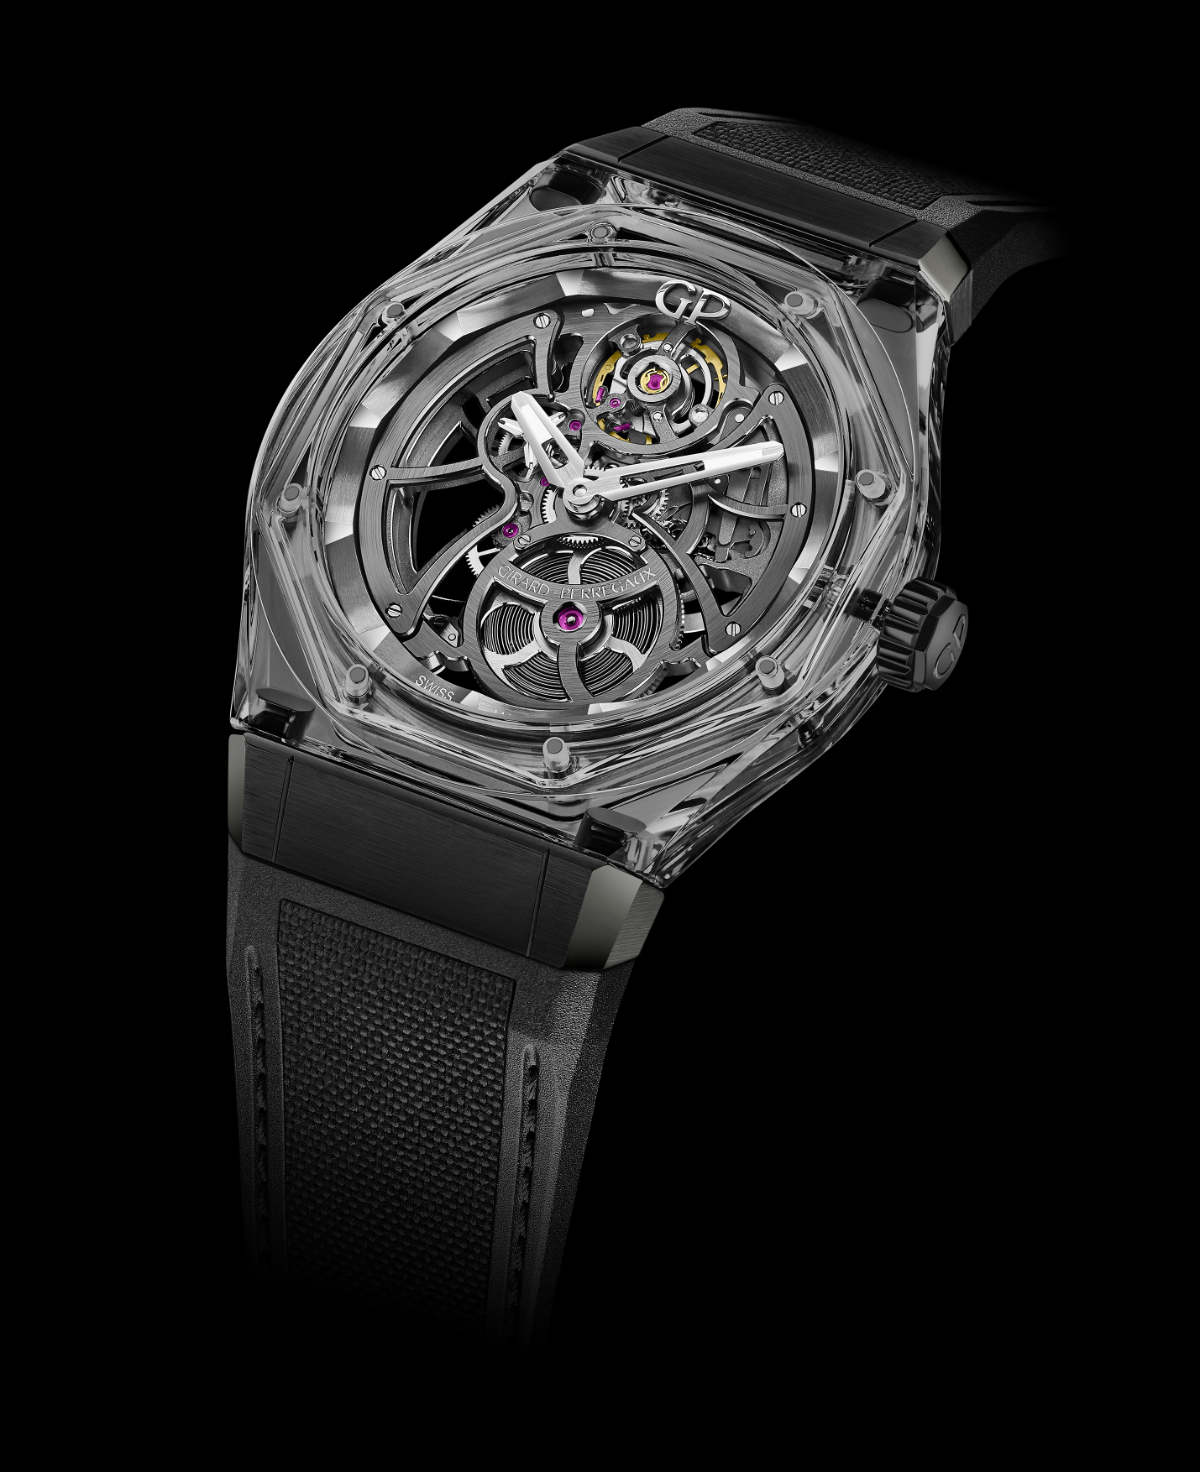 The Powerful Silhouette Of The Girard-Perregaux Laureato: Absolute Light & Shade And Light & Fire